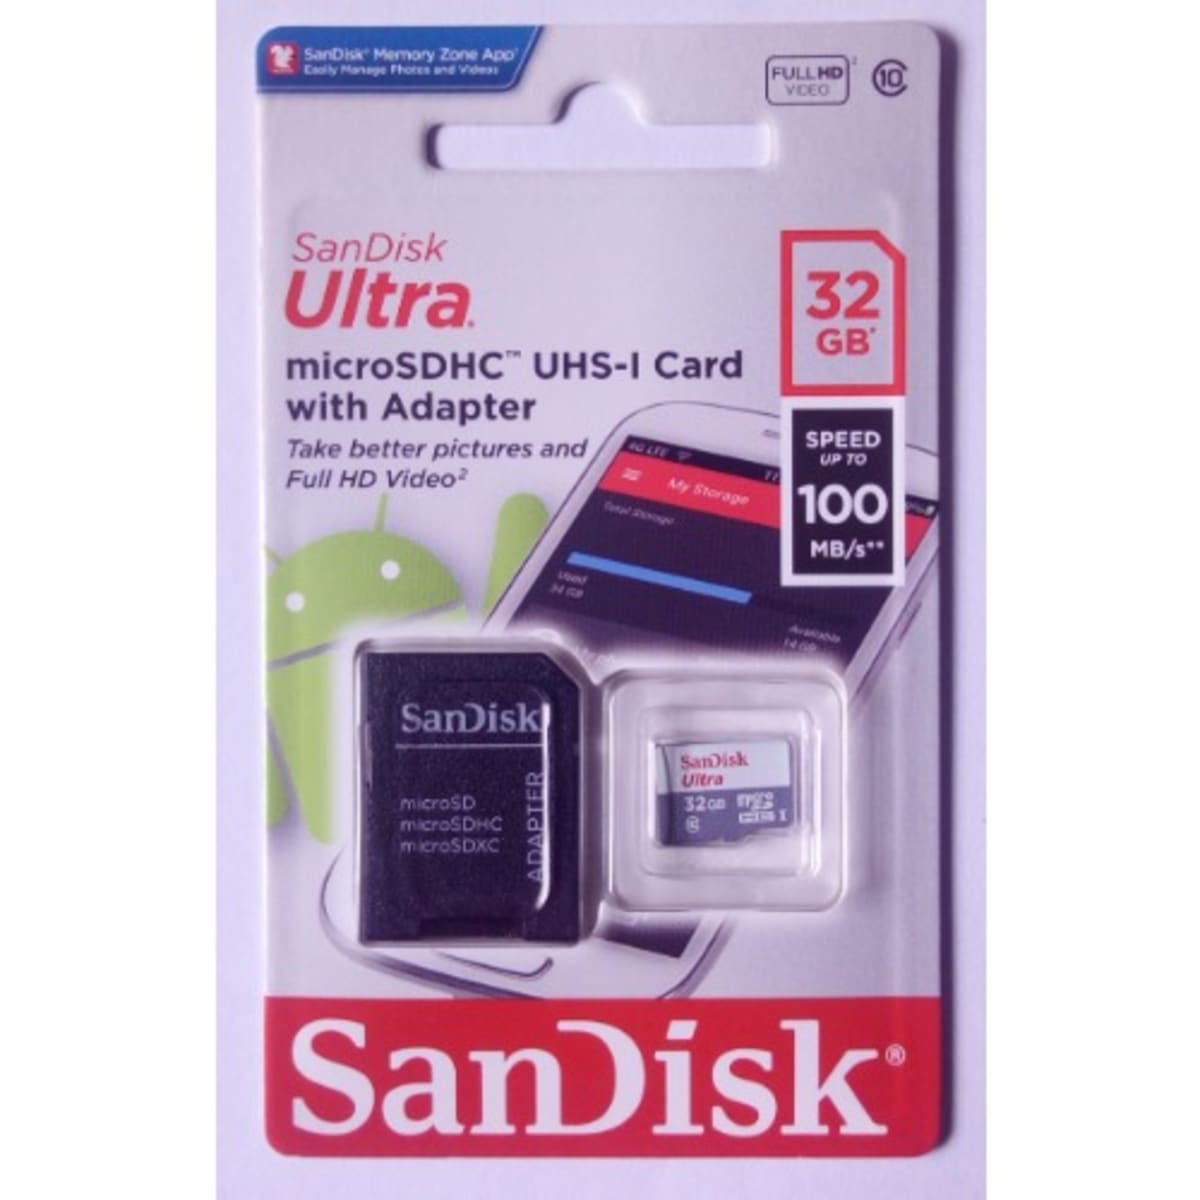  SanDisk Ultra 32GB microSDHC UHS-I Card with Adapter